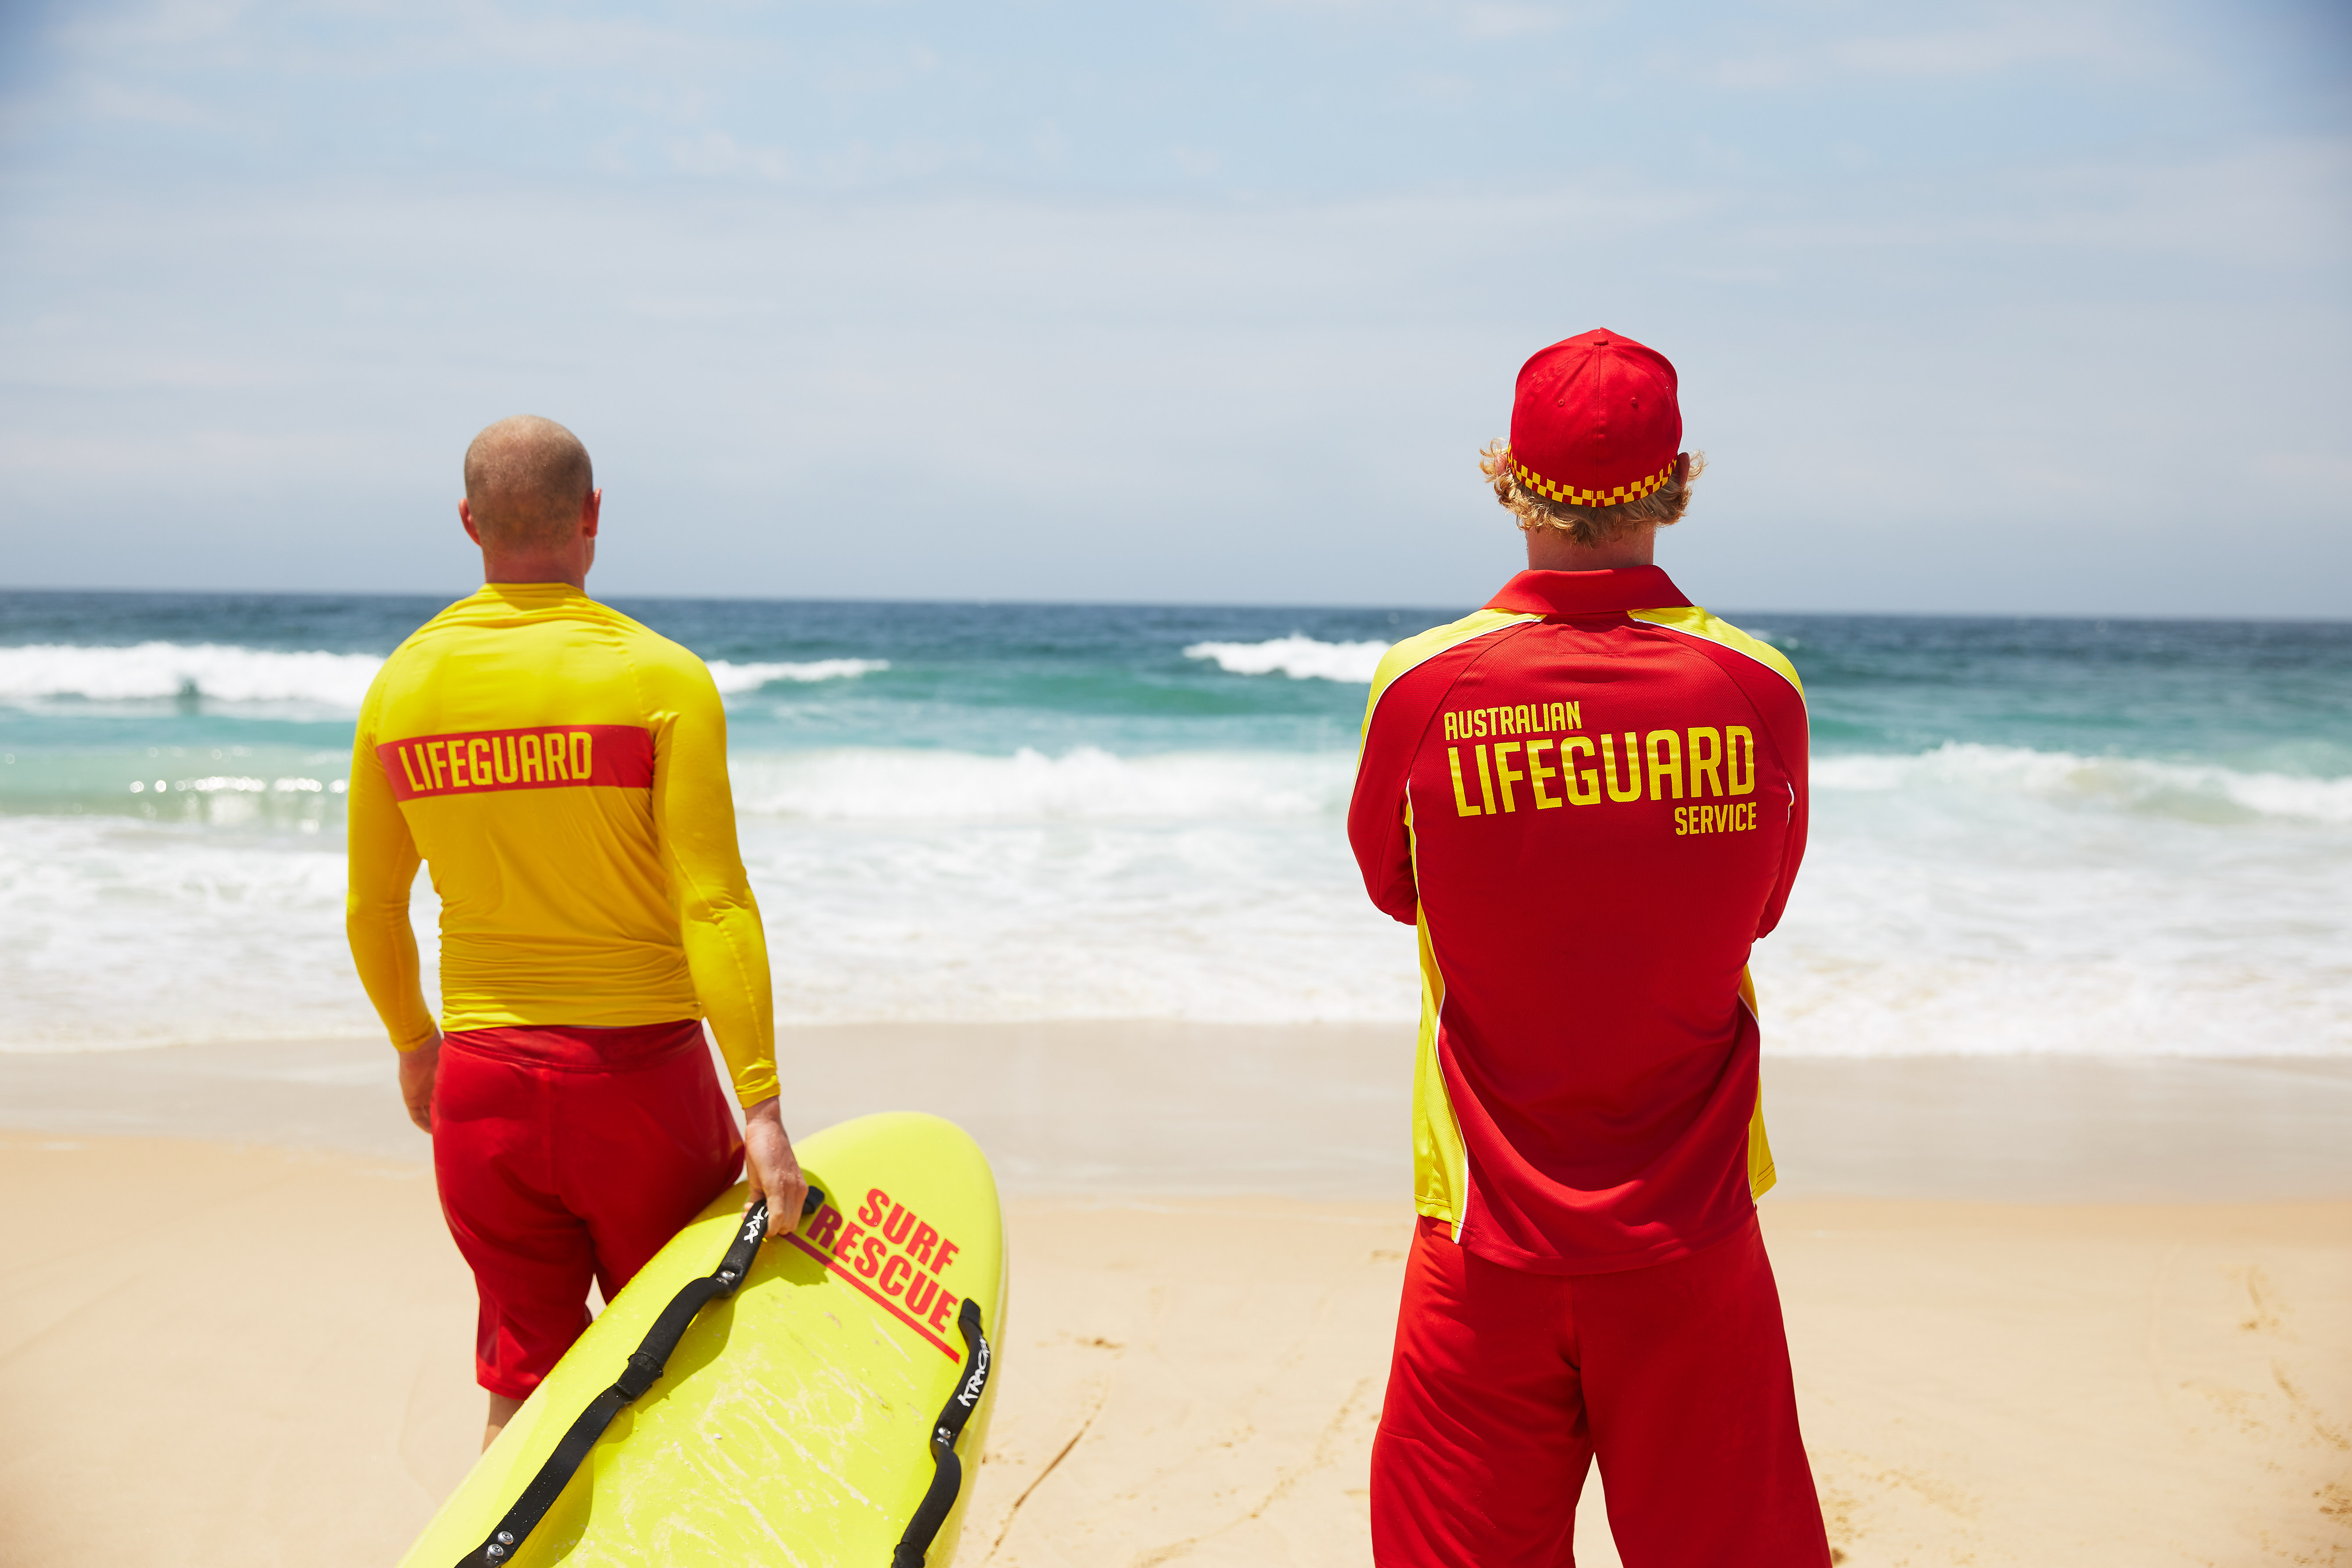 Lifeguards Wallpapers High Quality | Download Free